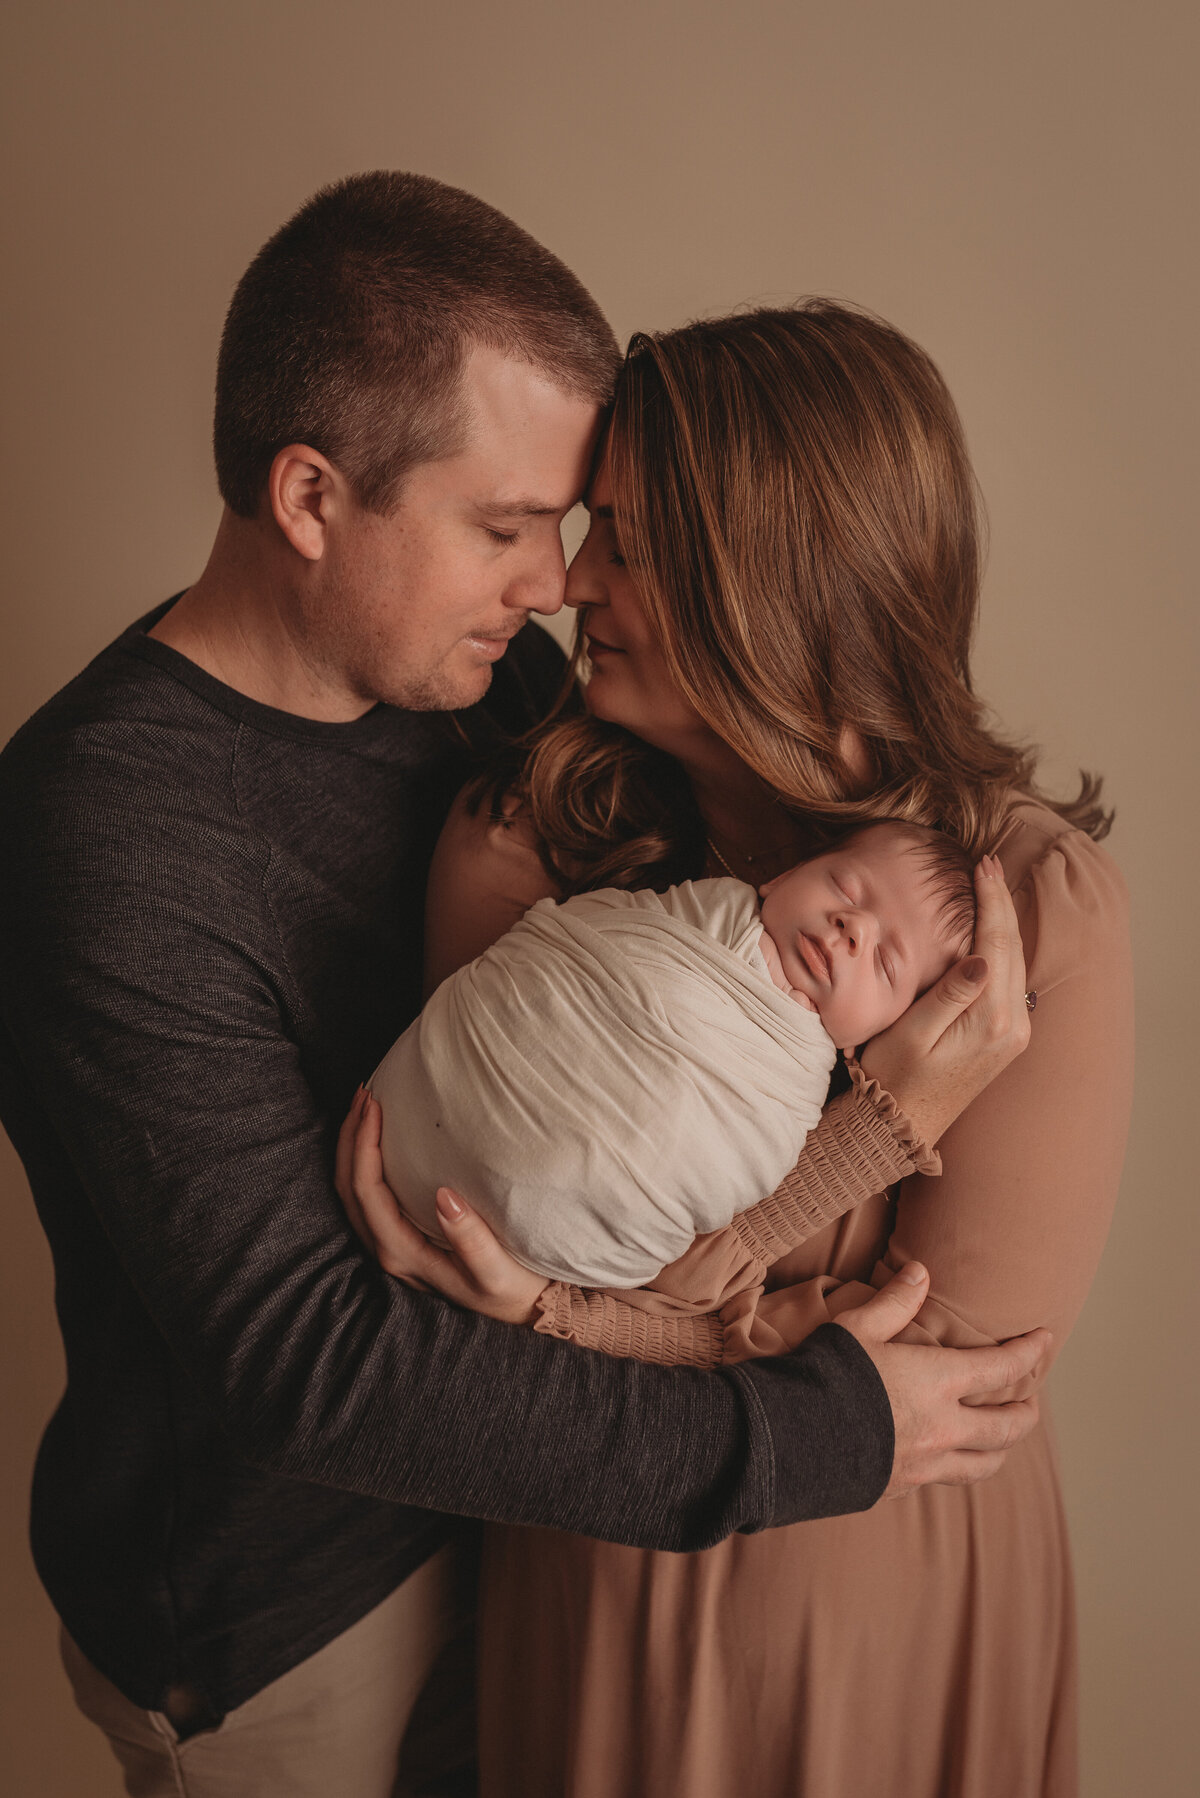 Photography session at Woodstock GA newborn photography studio of mom, dad and baby snuggling close closing eyes.